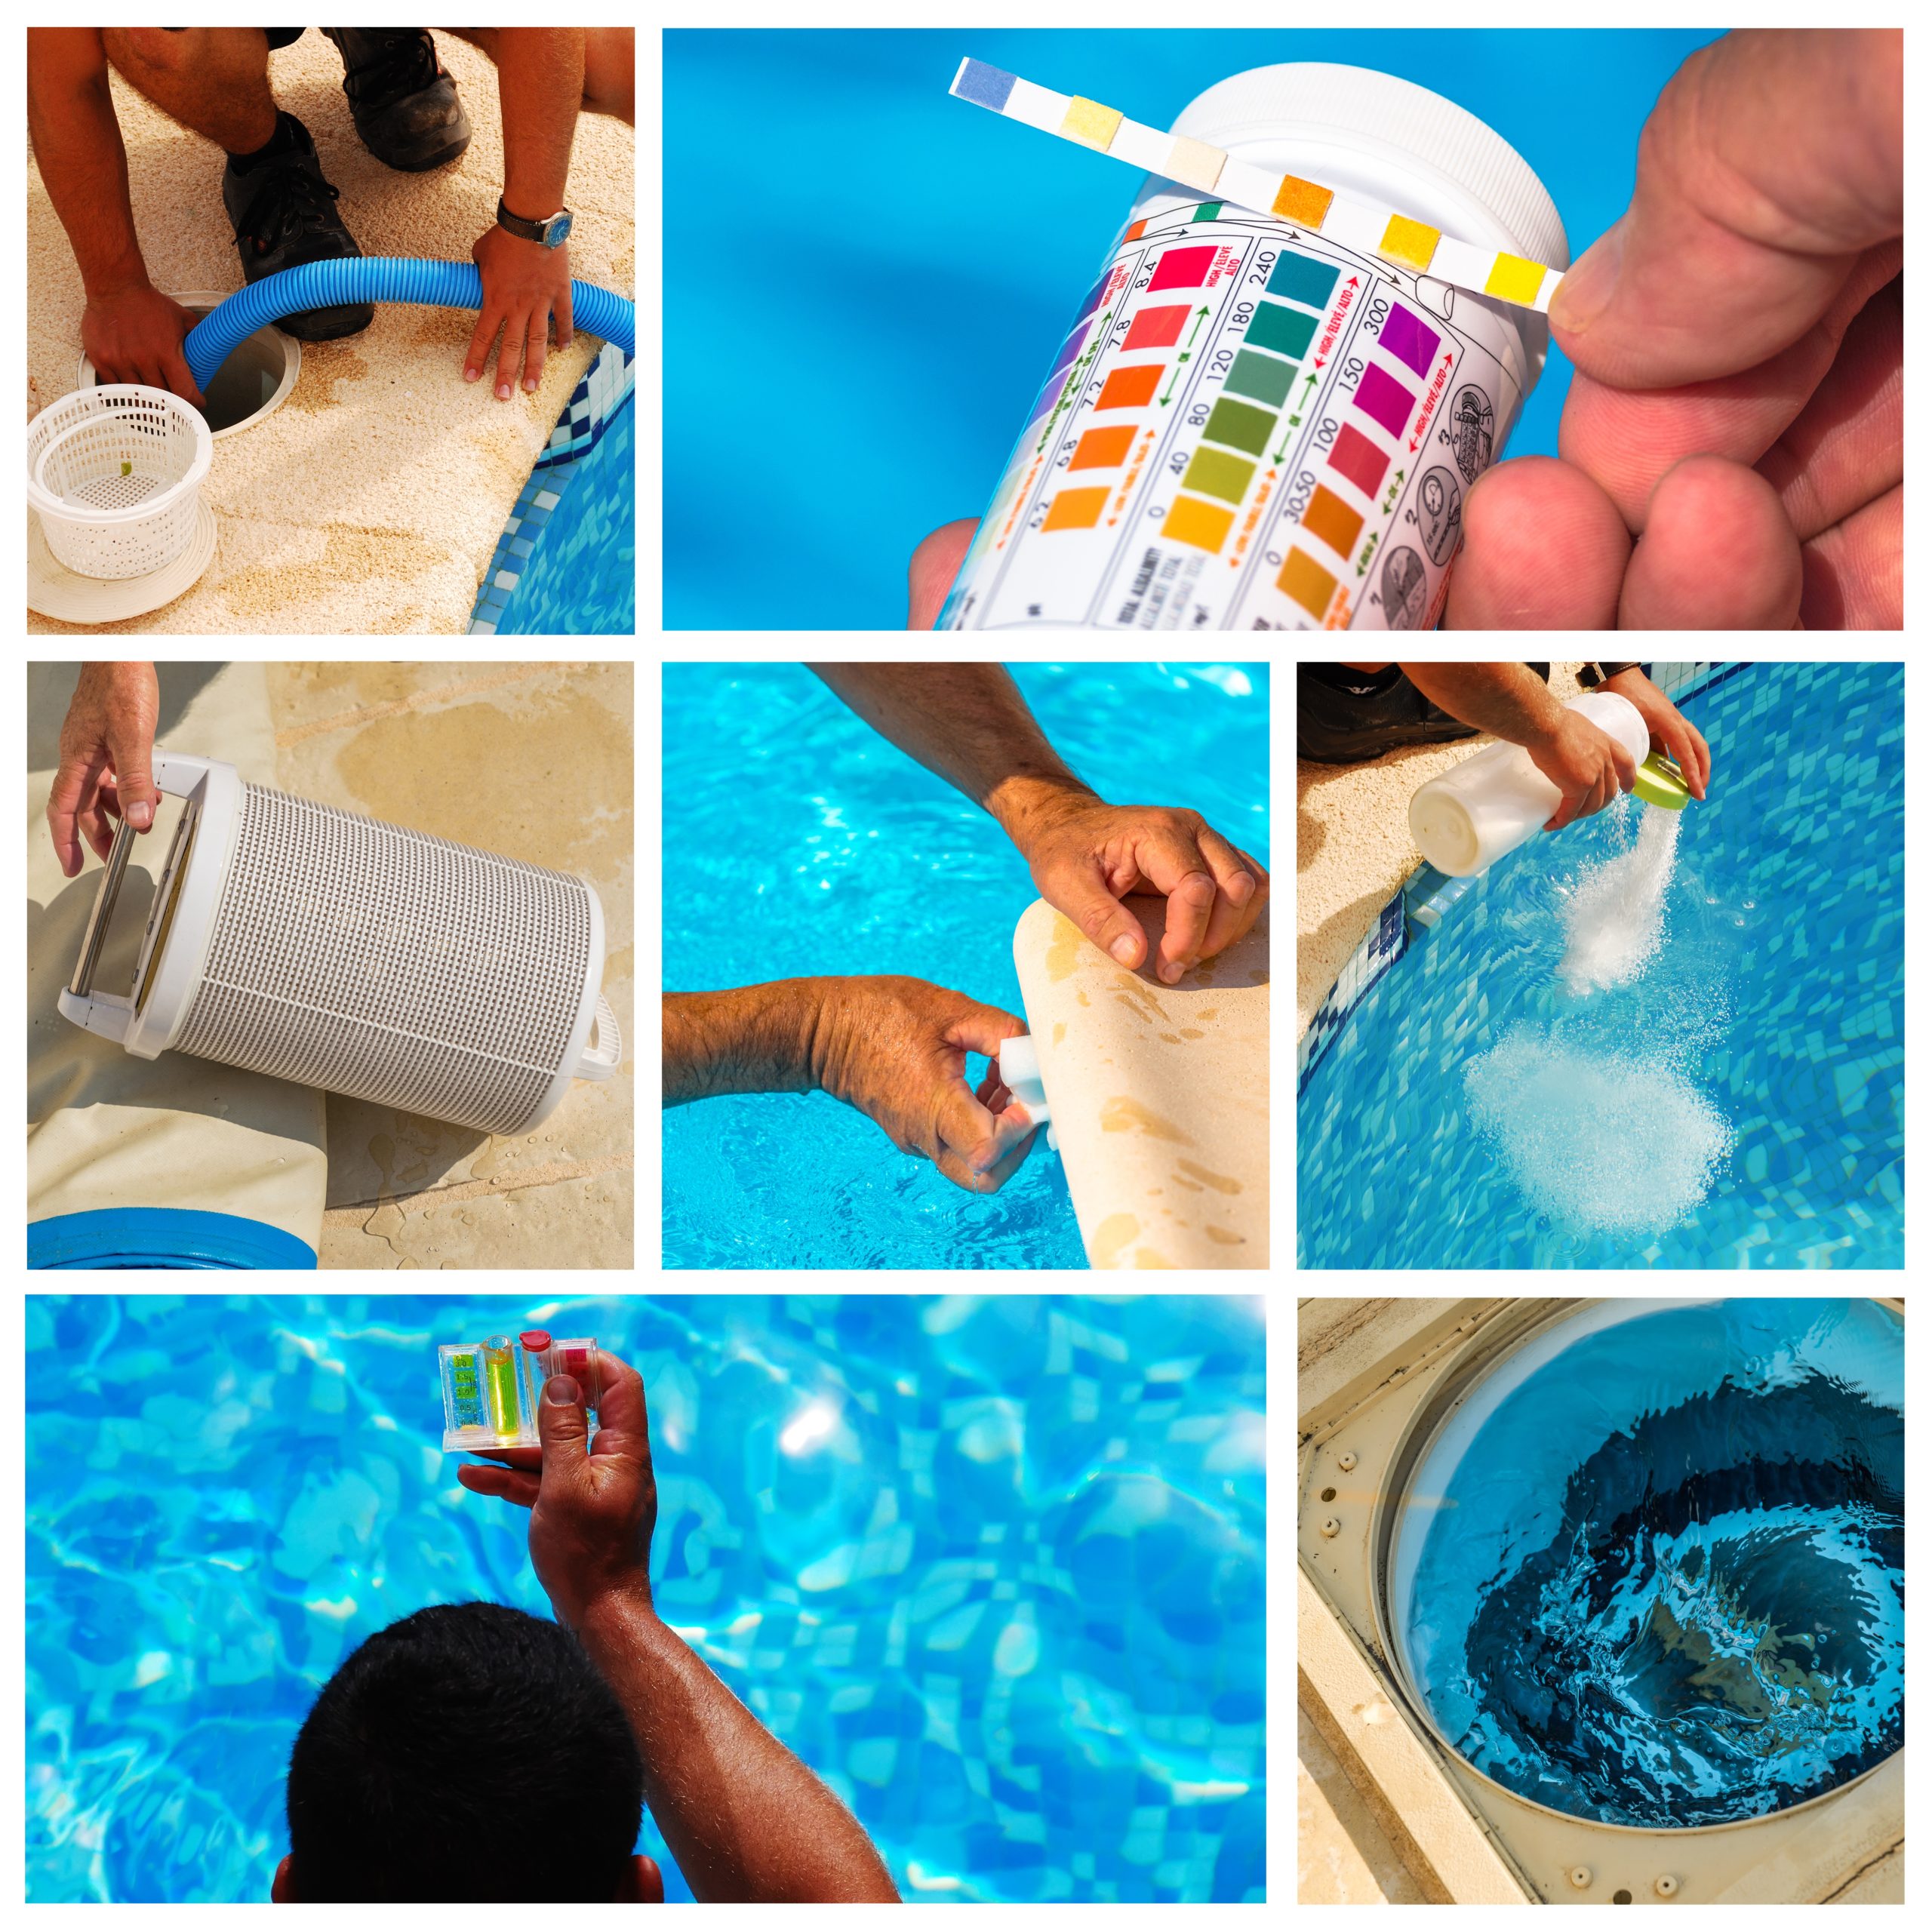 A pool maintenance kit and system